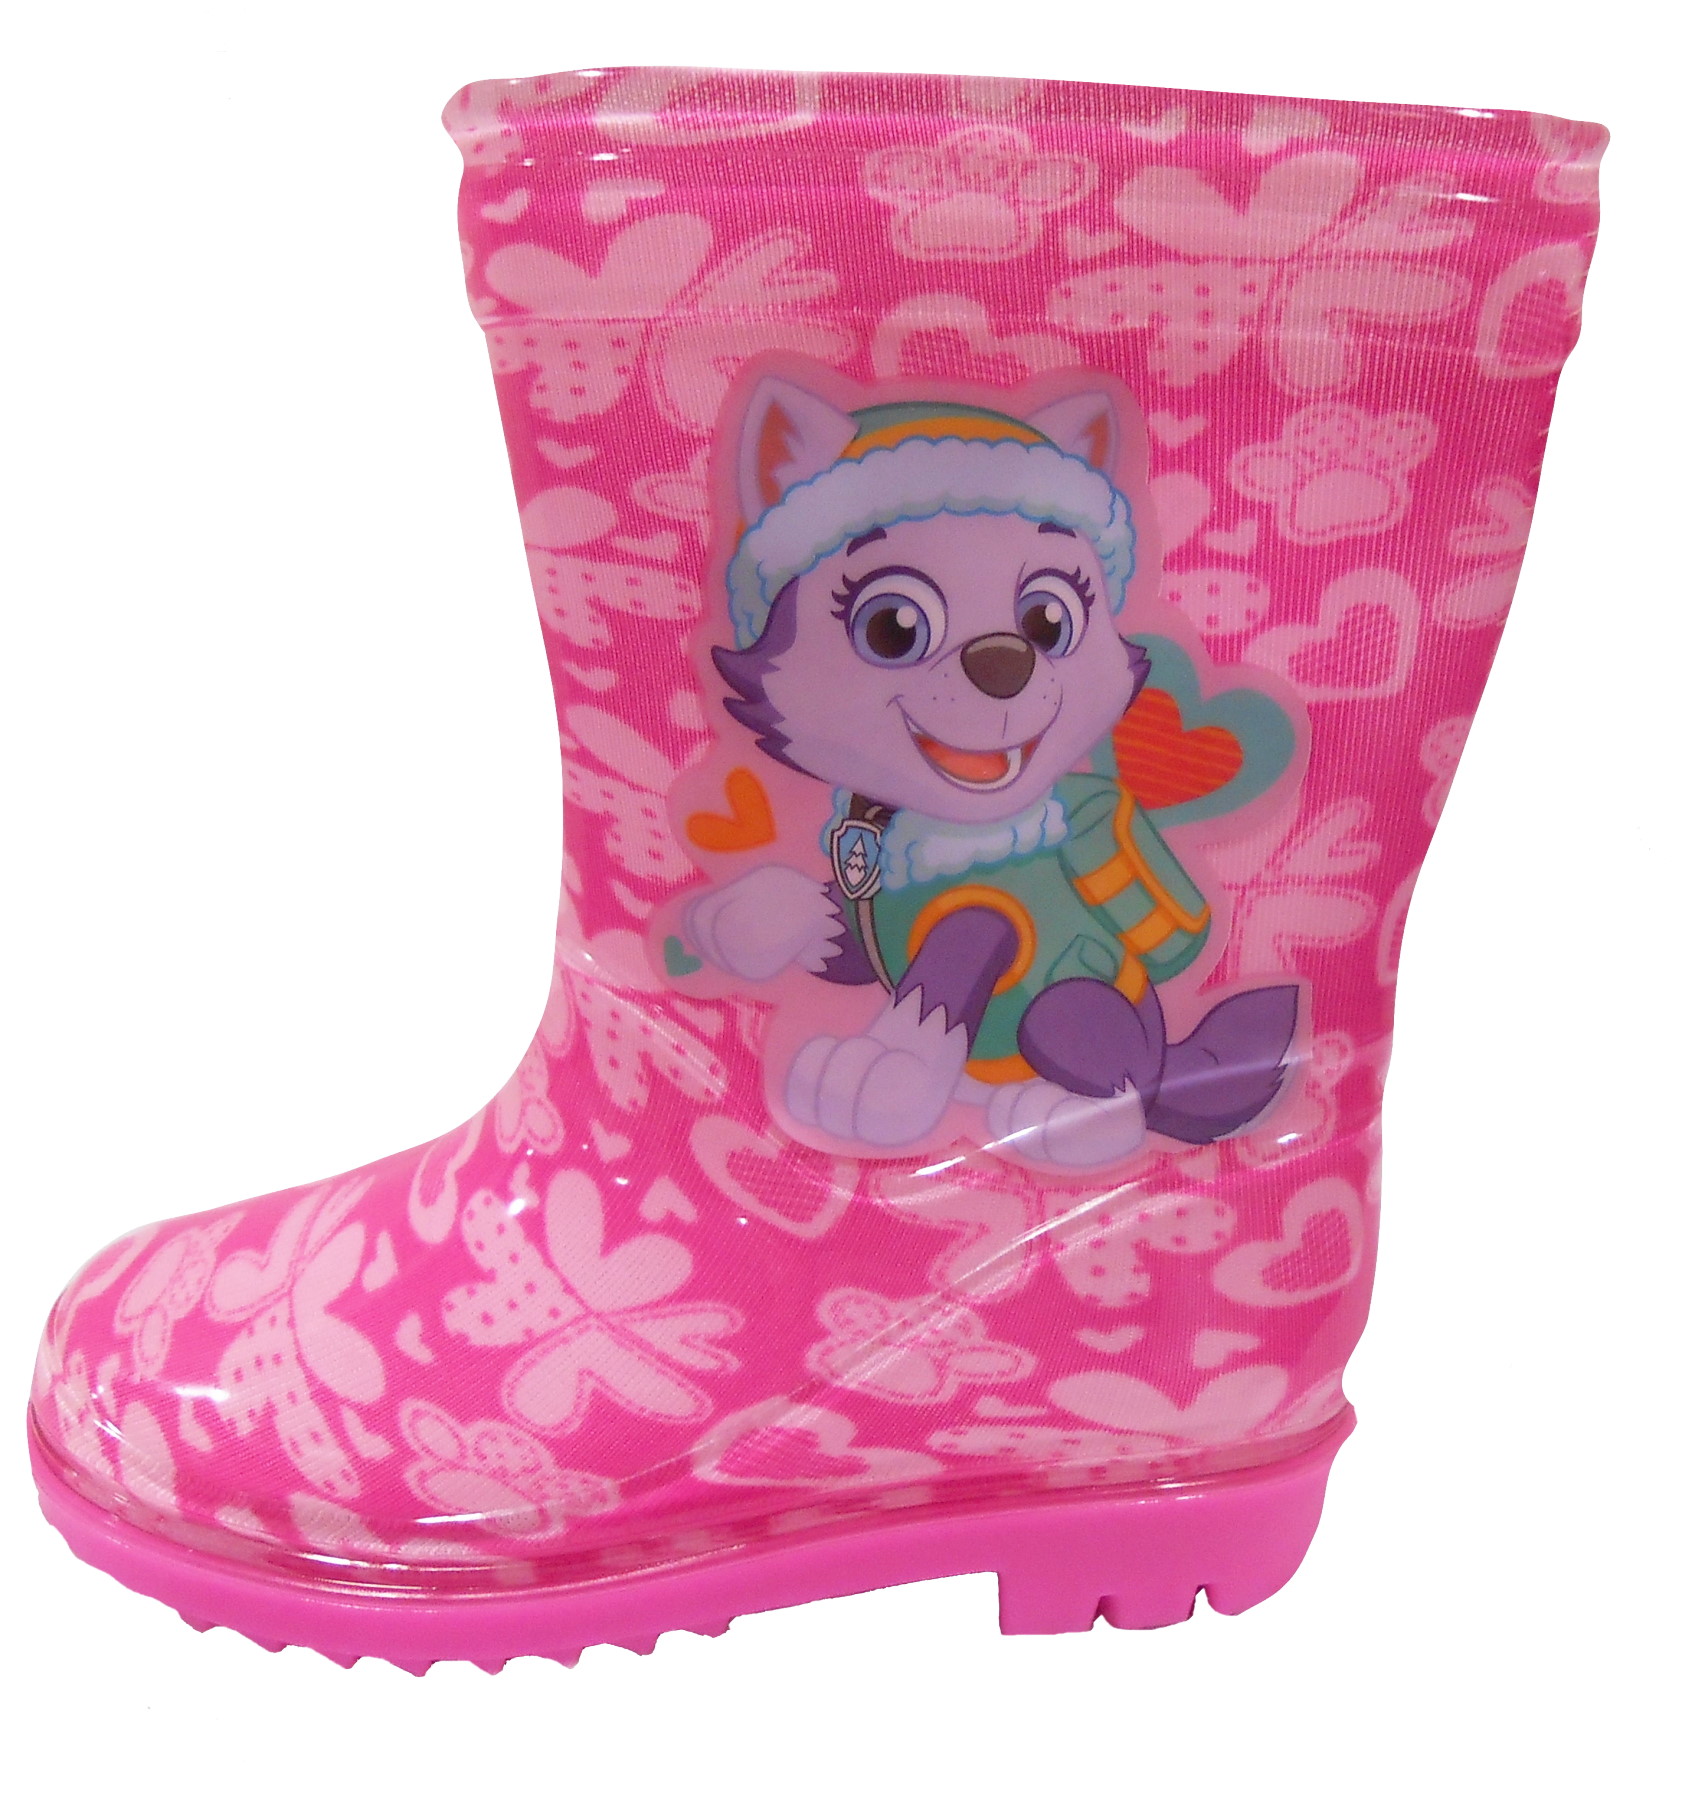 pwp pink welly 56918 (4).JPG  by Thingimijigs